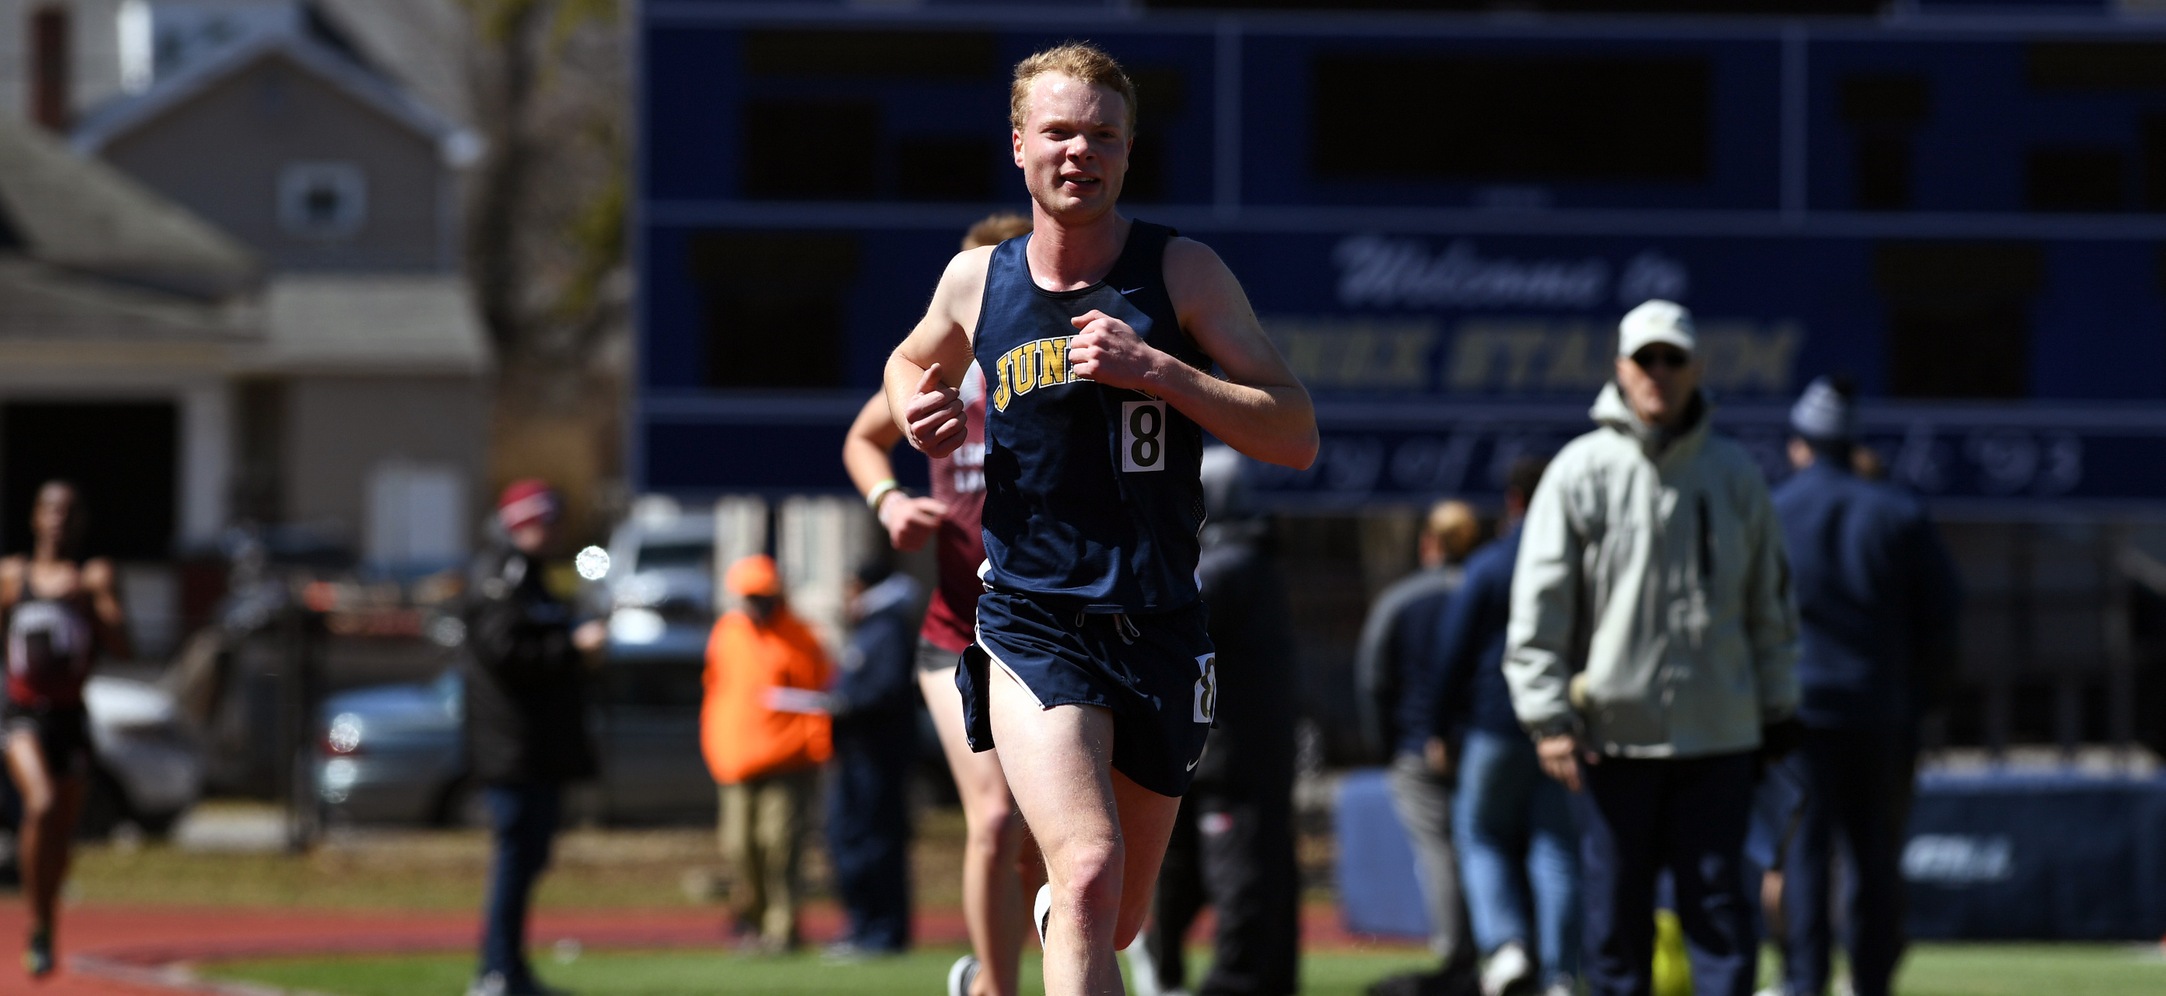 Men's Track and Field Kicks Off New Year at SU Orange and Maroon Classic